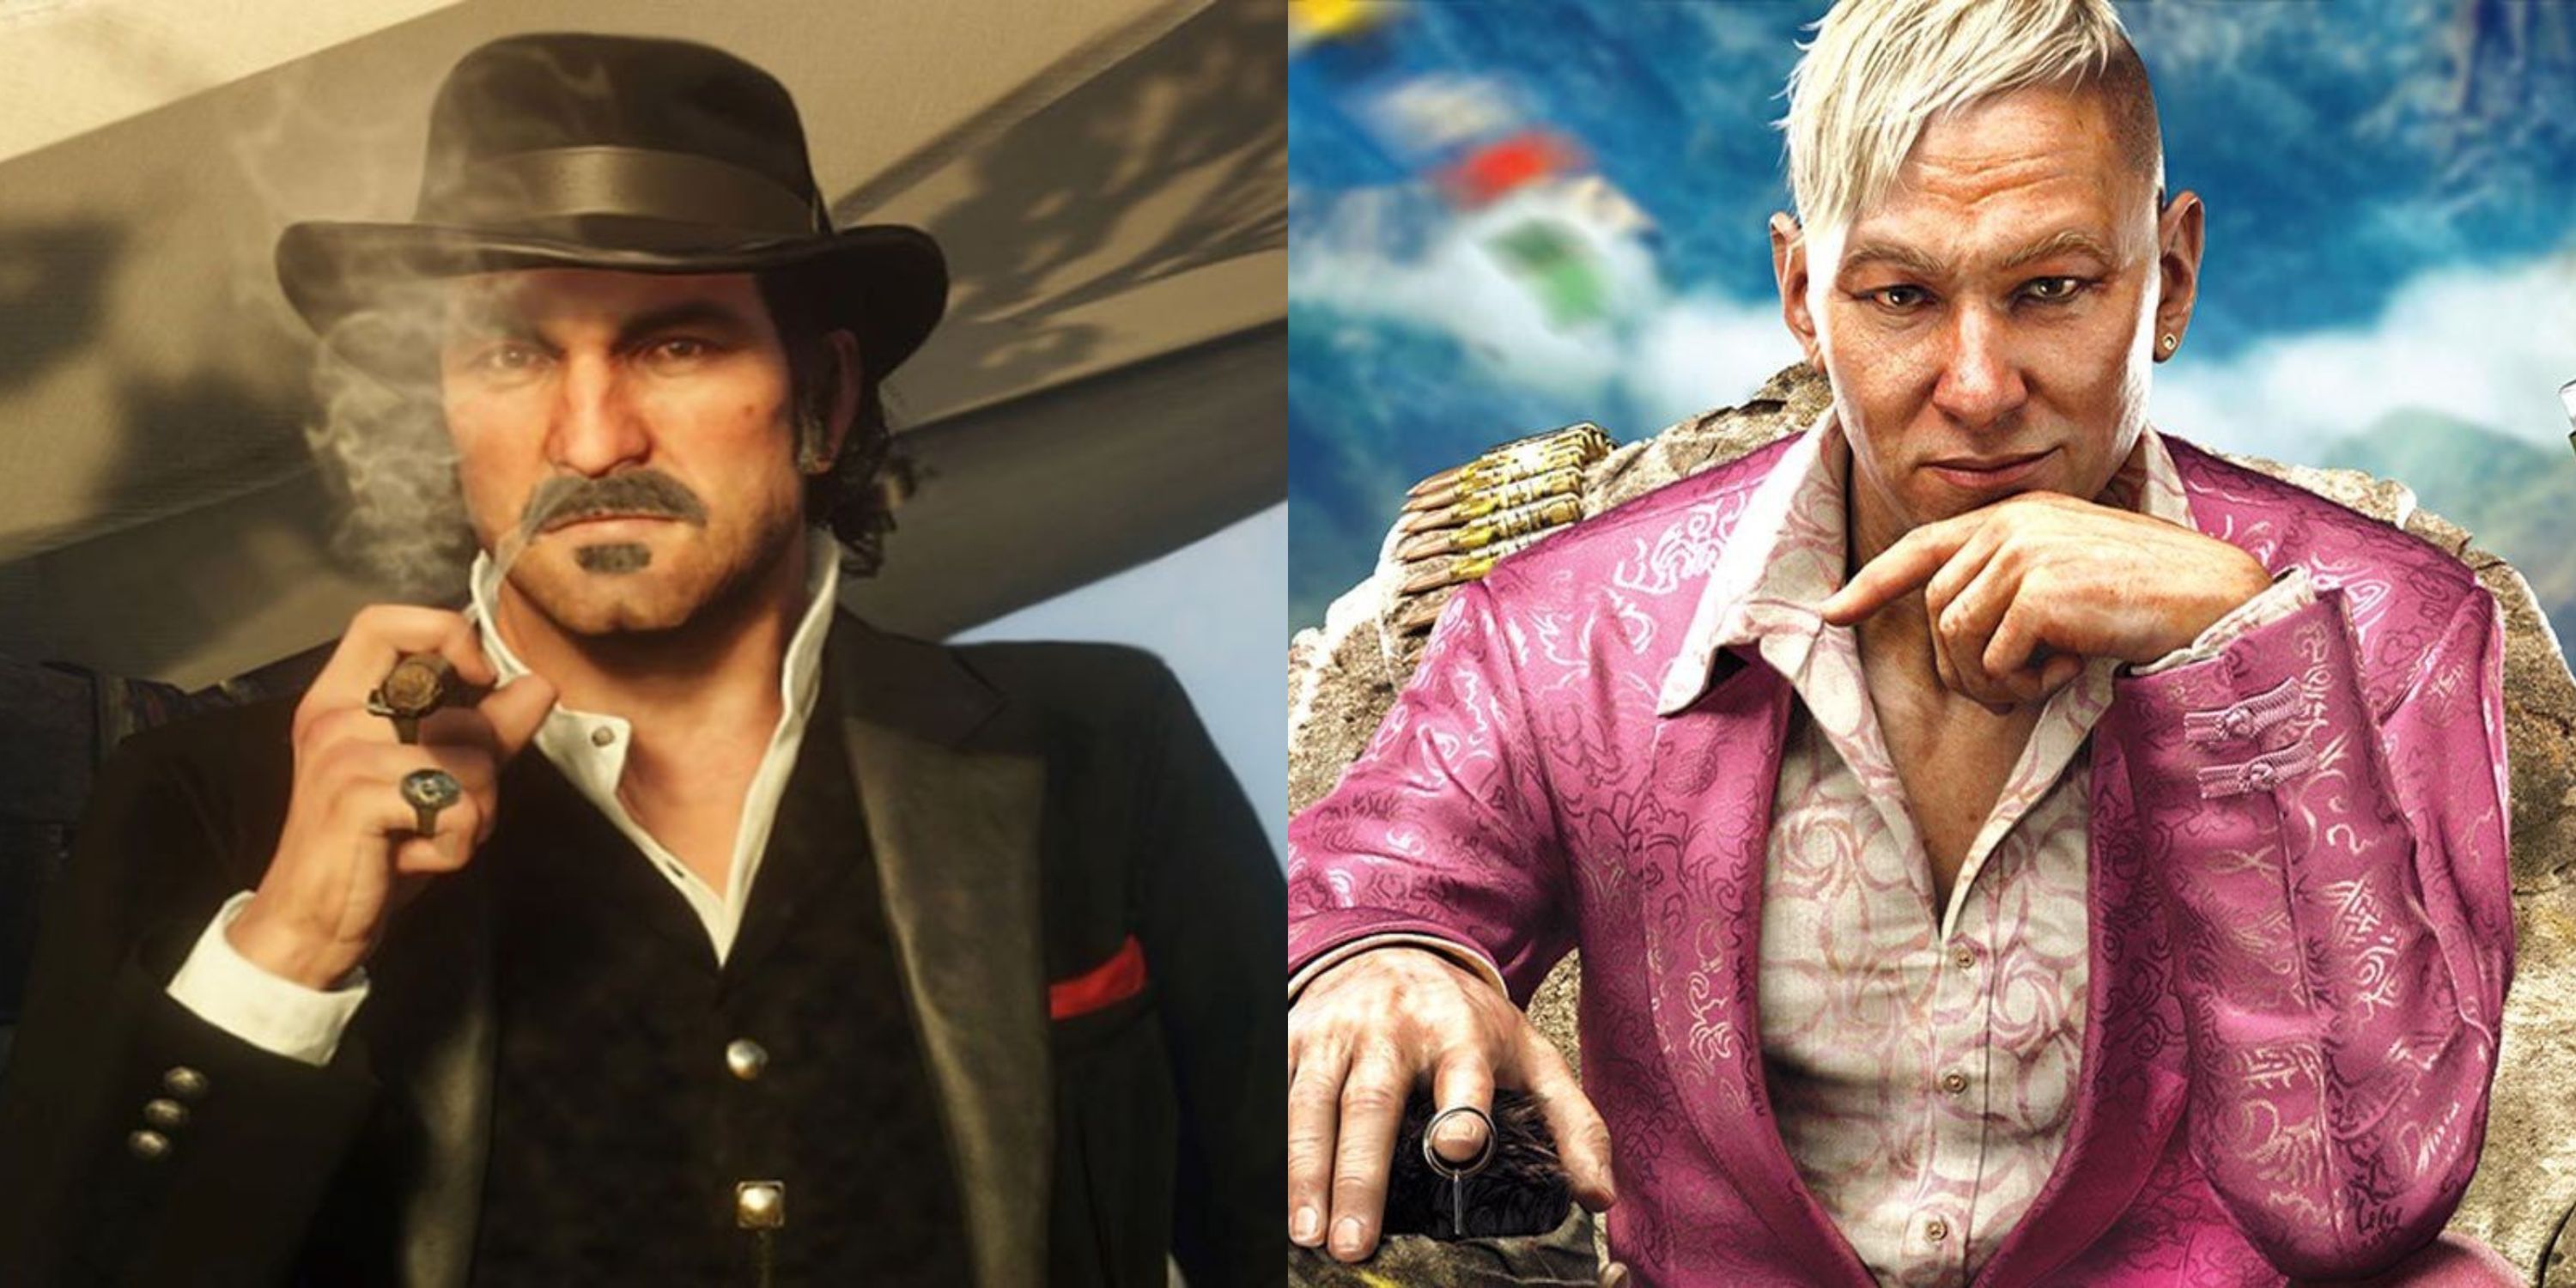 Featured image Dutch van der Linde in red Dead Redemption 2 and Pagan Min in Far Cry 4 poster art